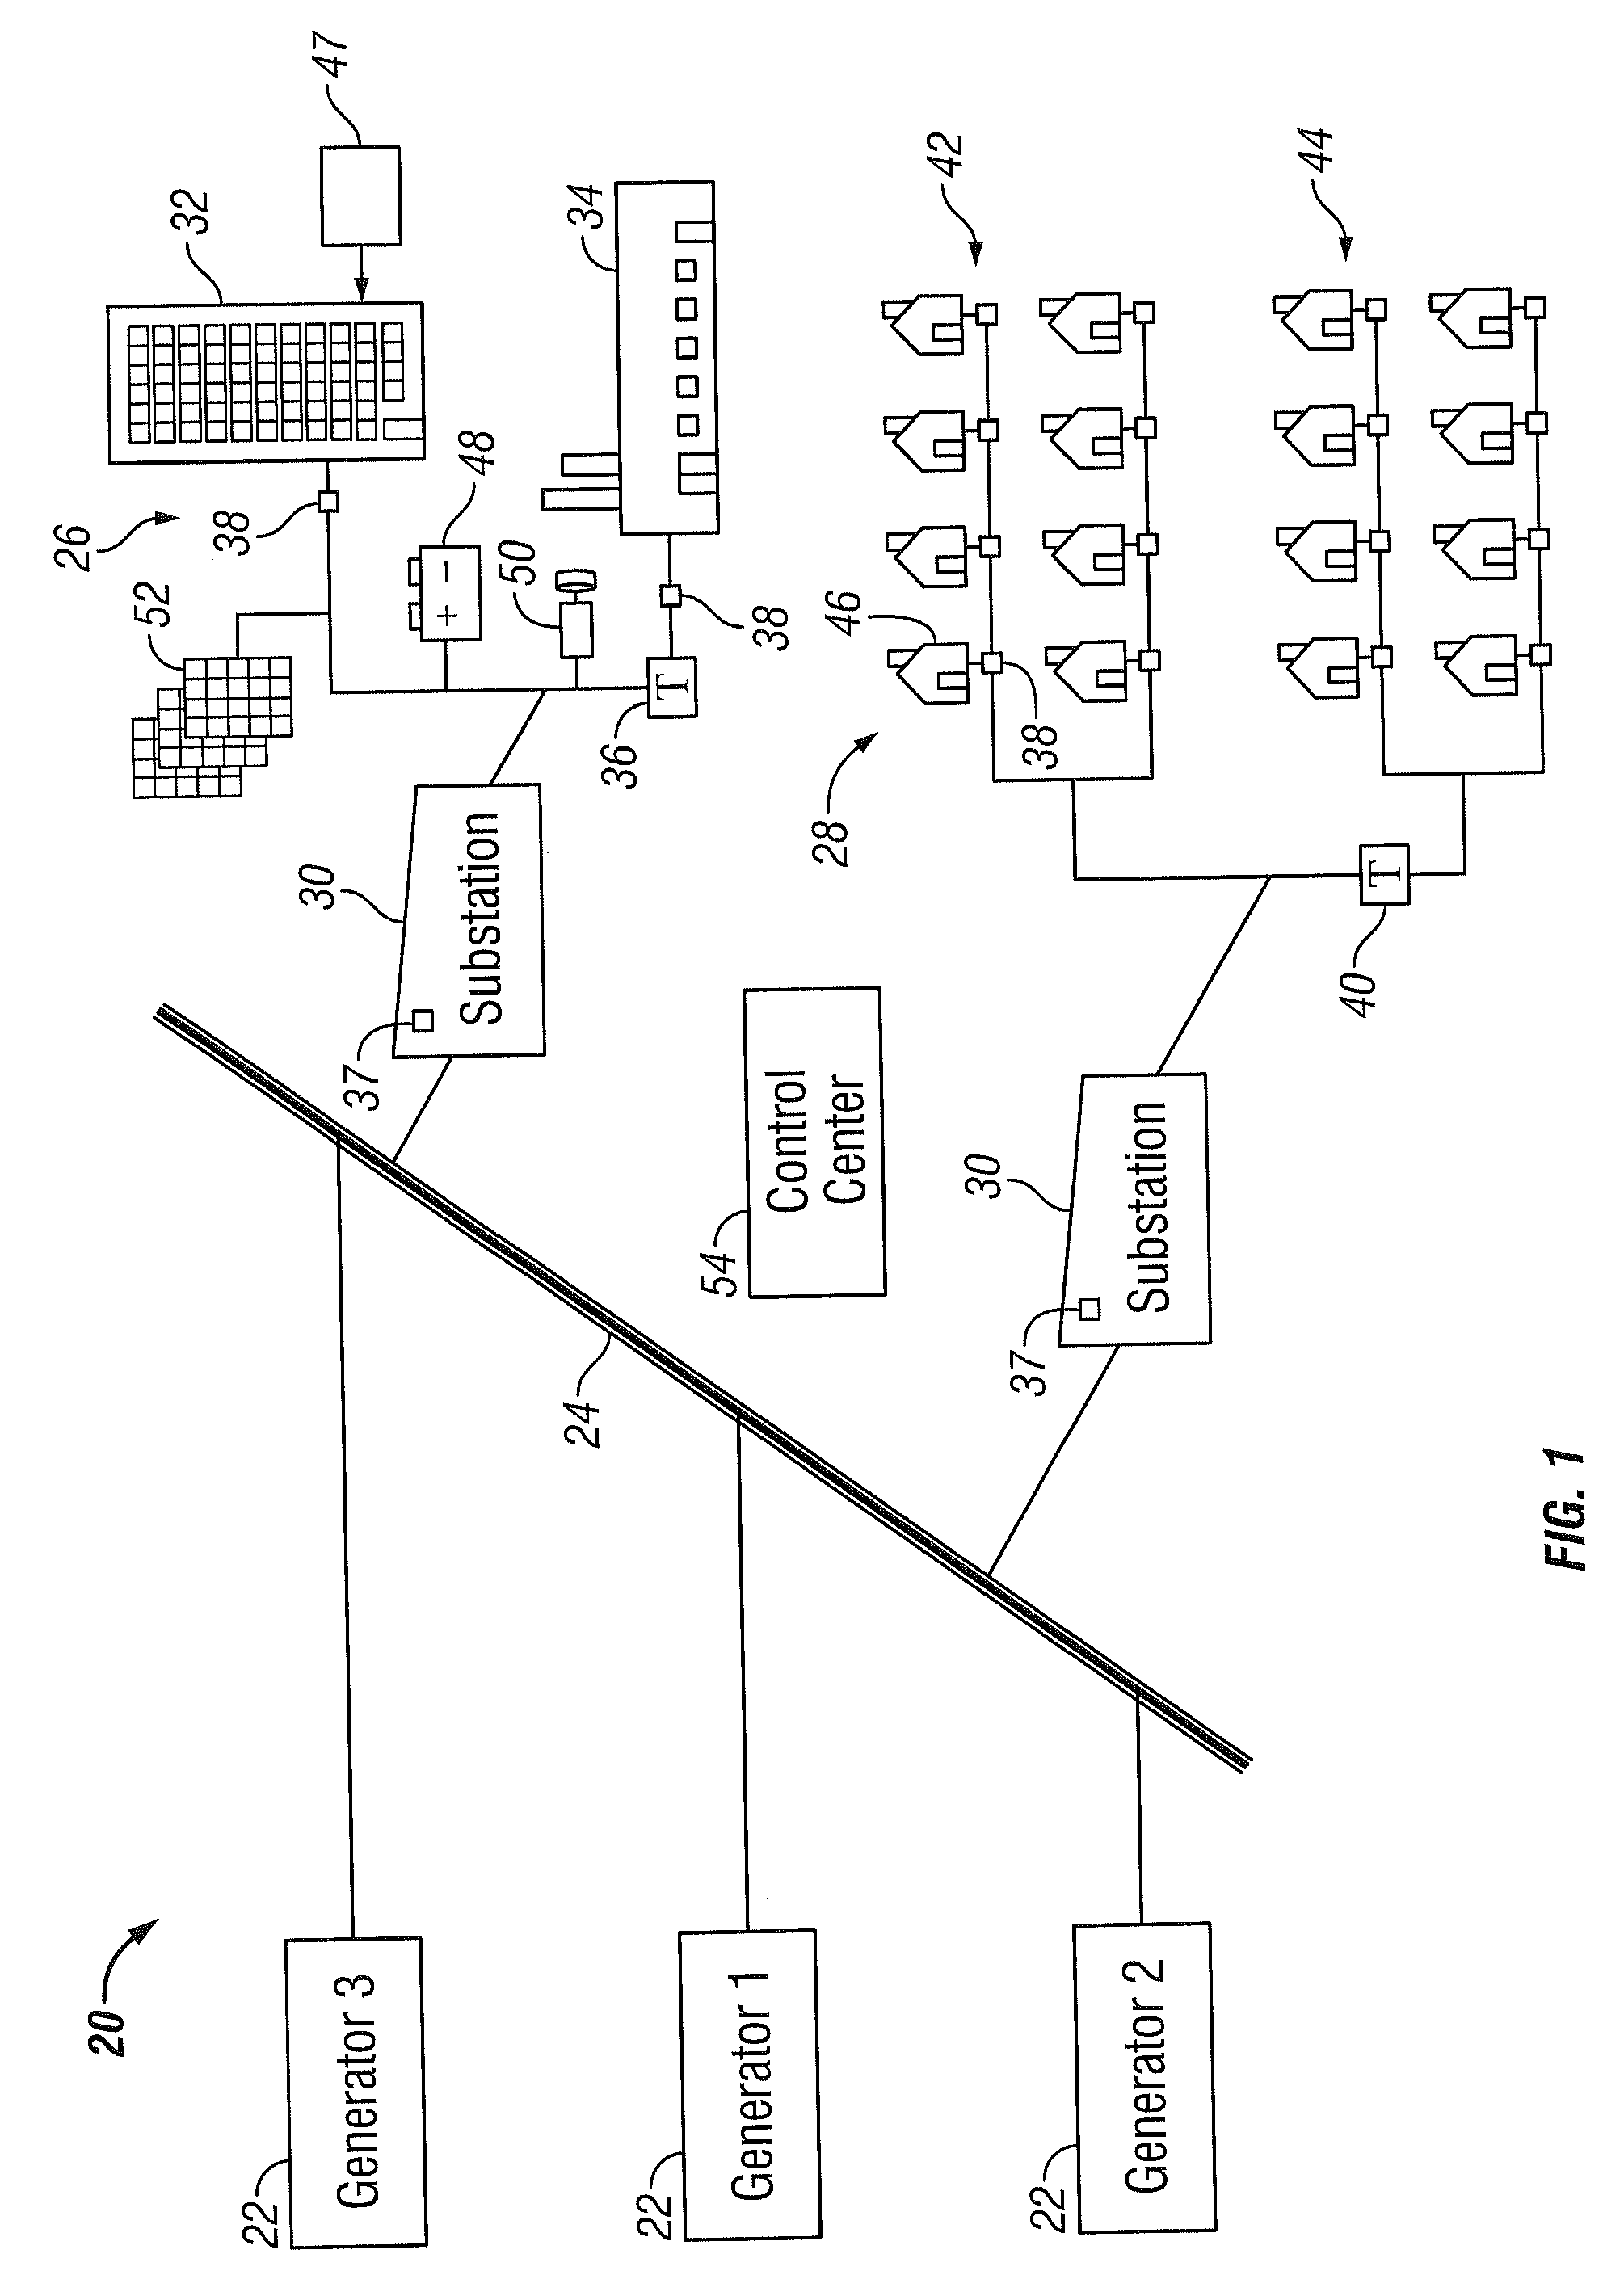 Electrical network command and control system and method of operation